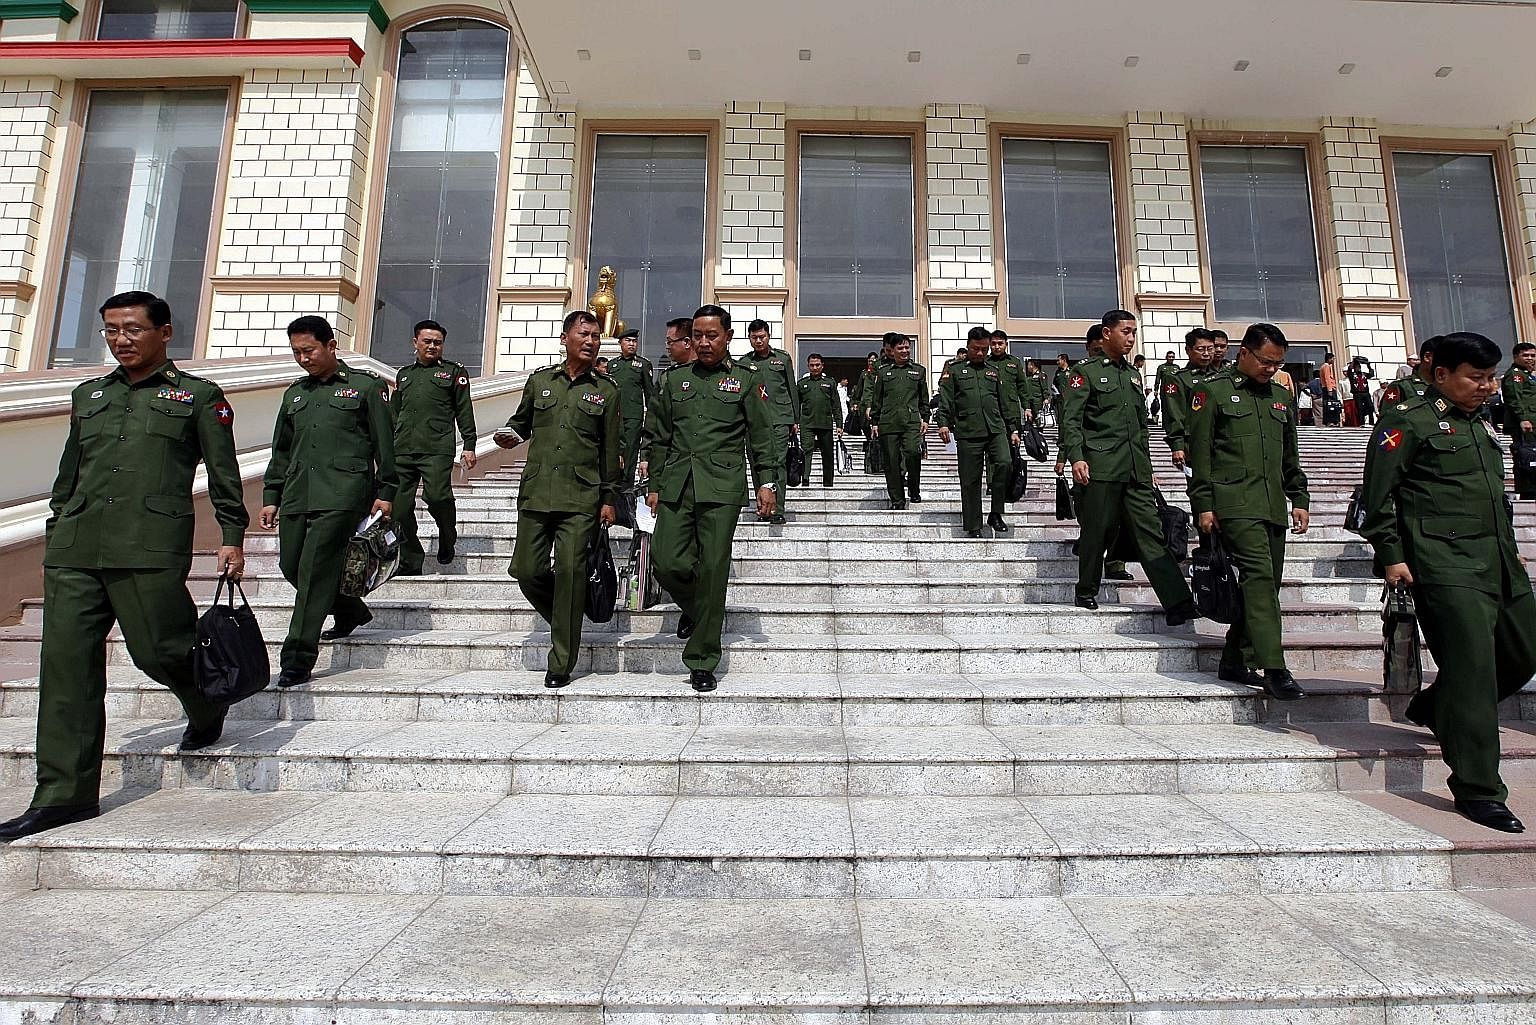 Military representatives leaving after a regular session of Parliament in Naypyitaw on March 1. Recent developments have suggested that the present military leadership is intent on sustaining its influence on the country's politics at least for the n